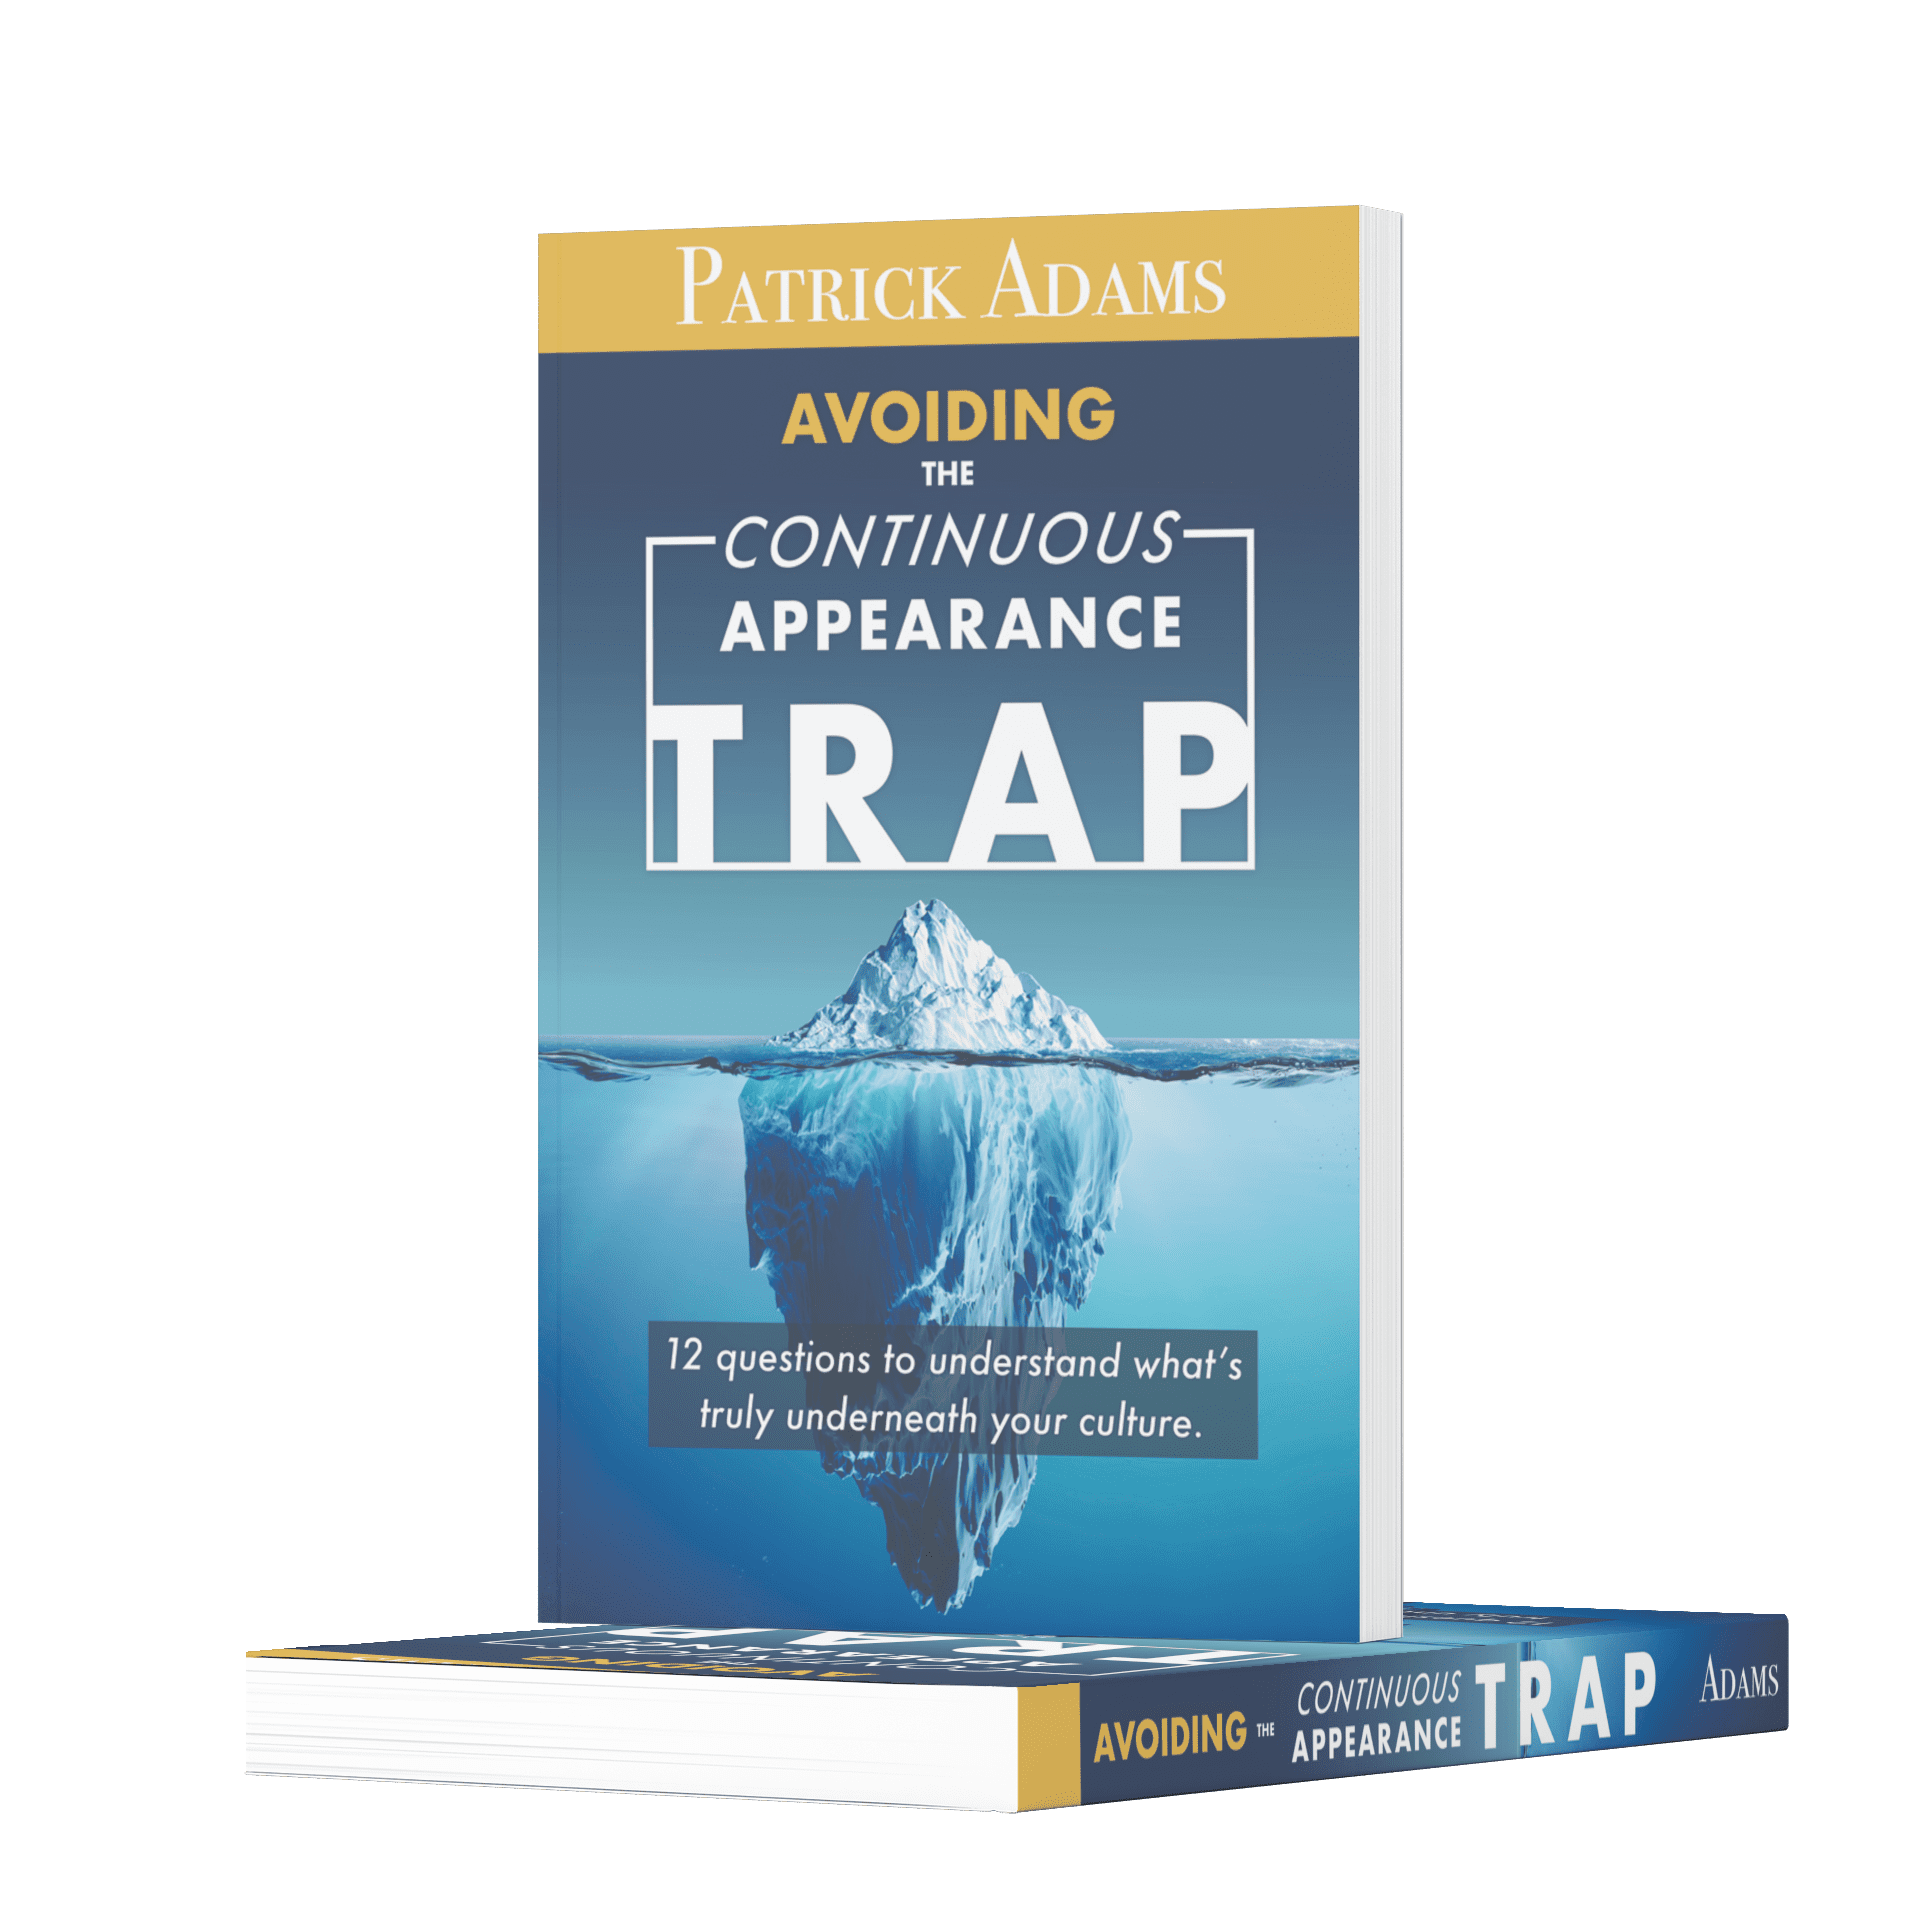 Avoiding the Continuous appearance TRAP